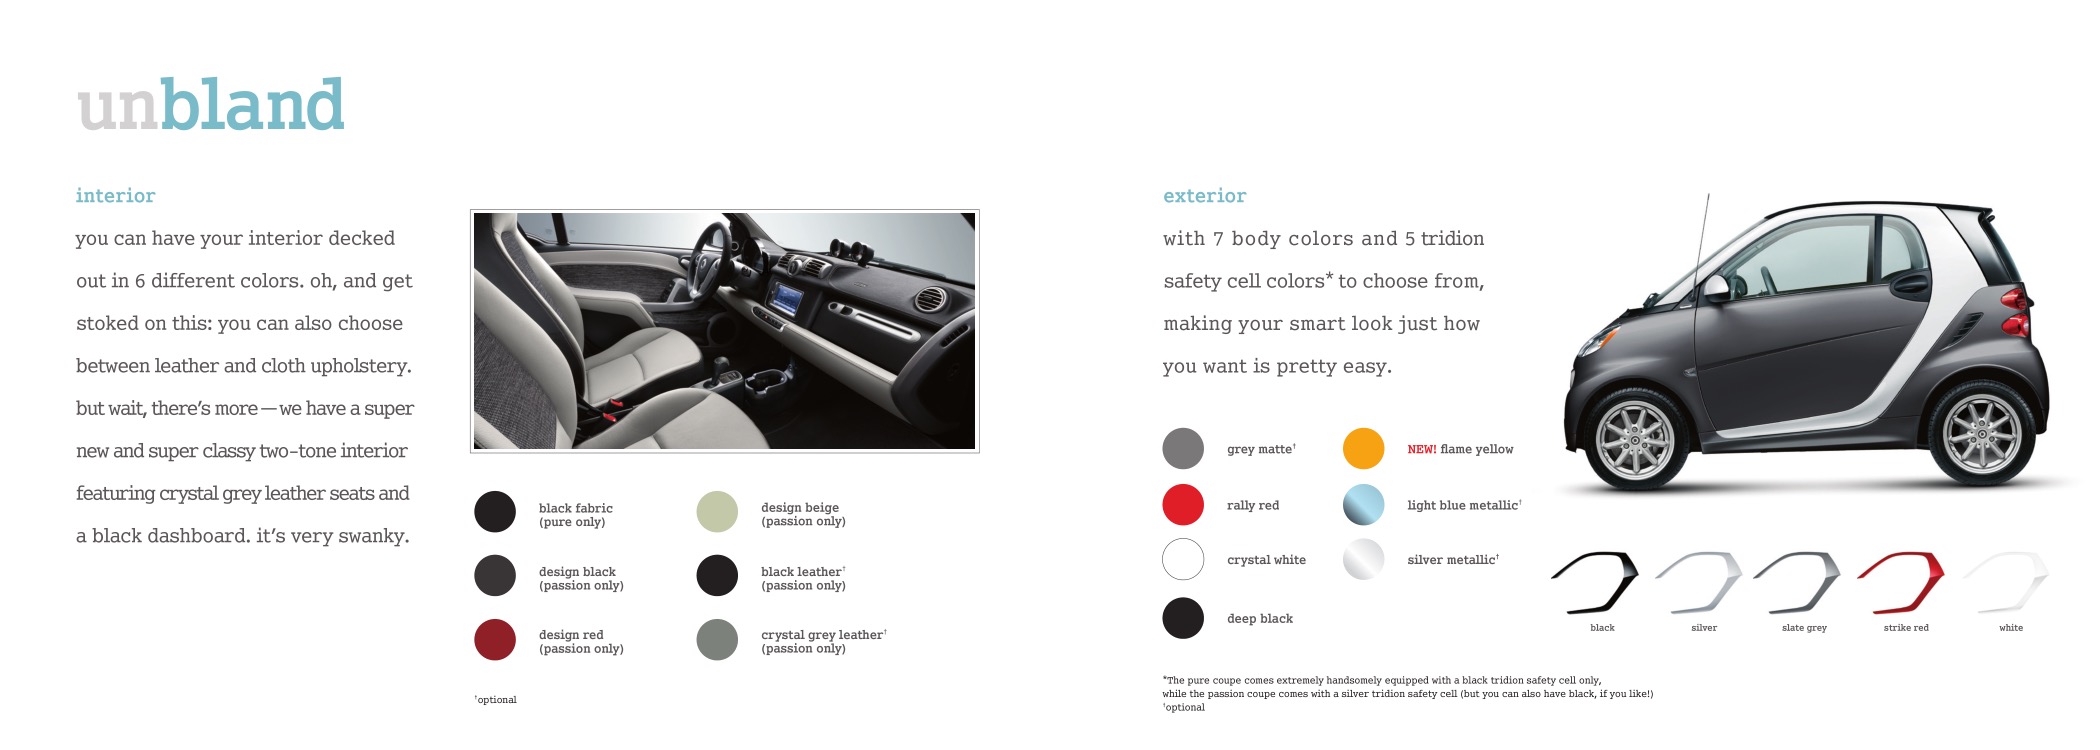 2015 Smart Fortwo Brochure Page 6